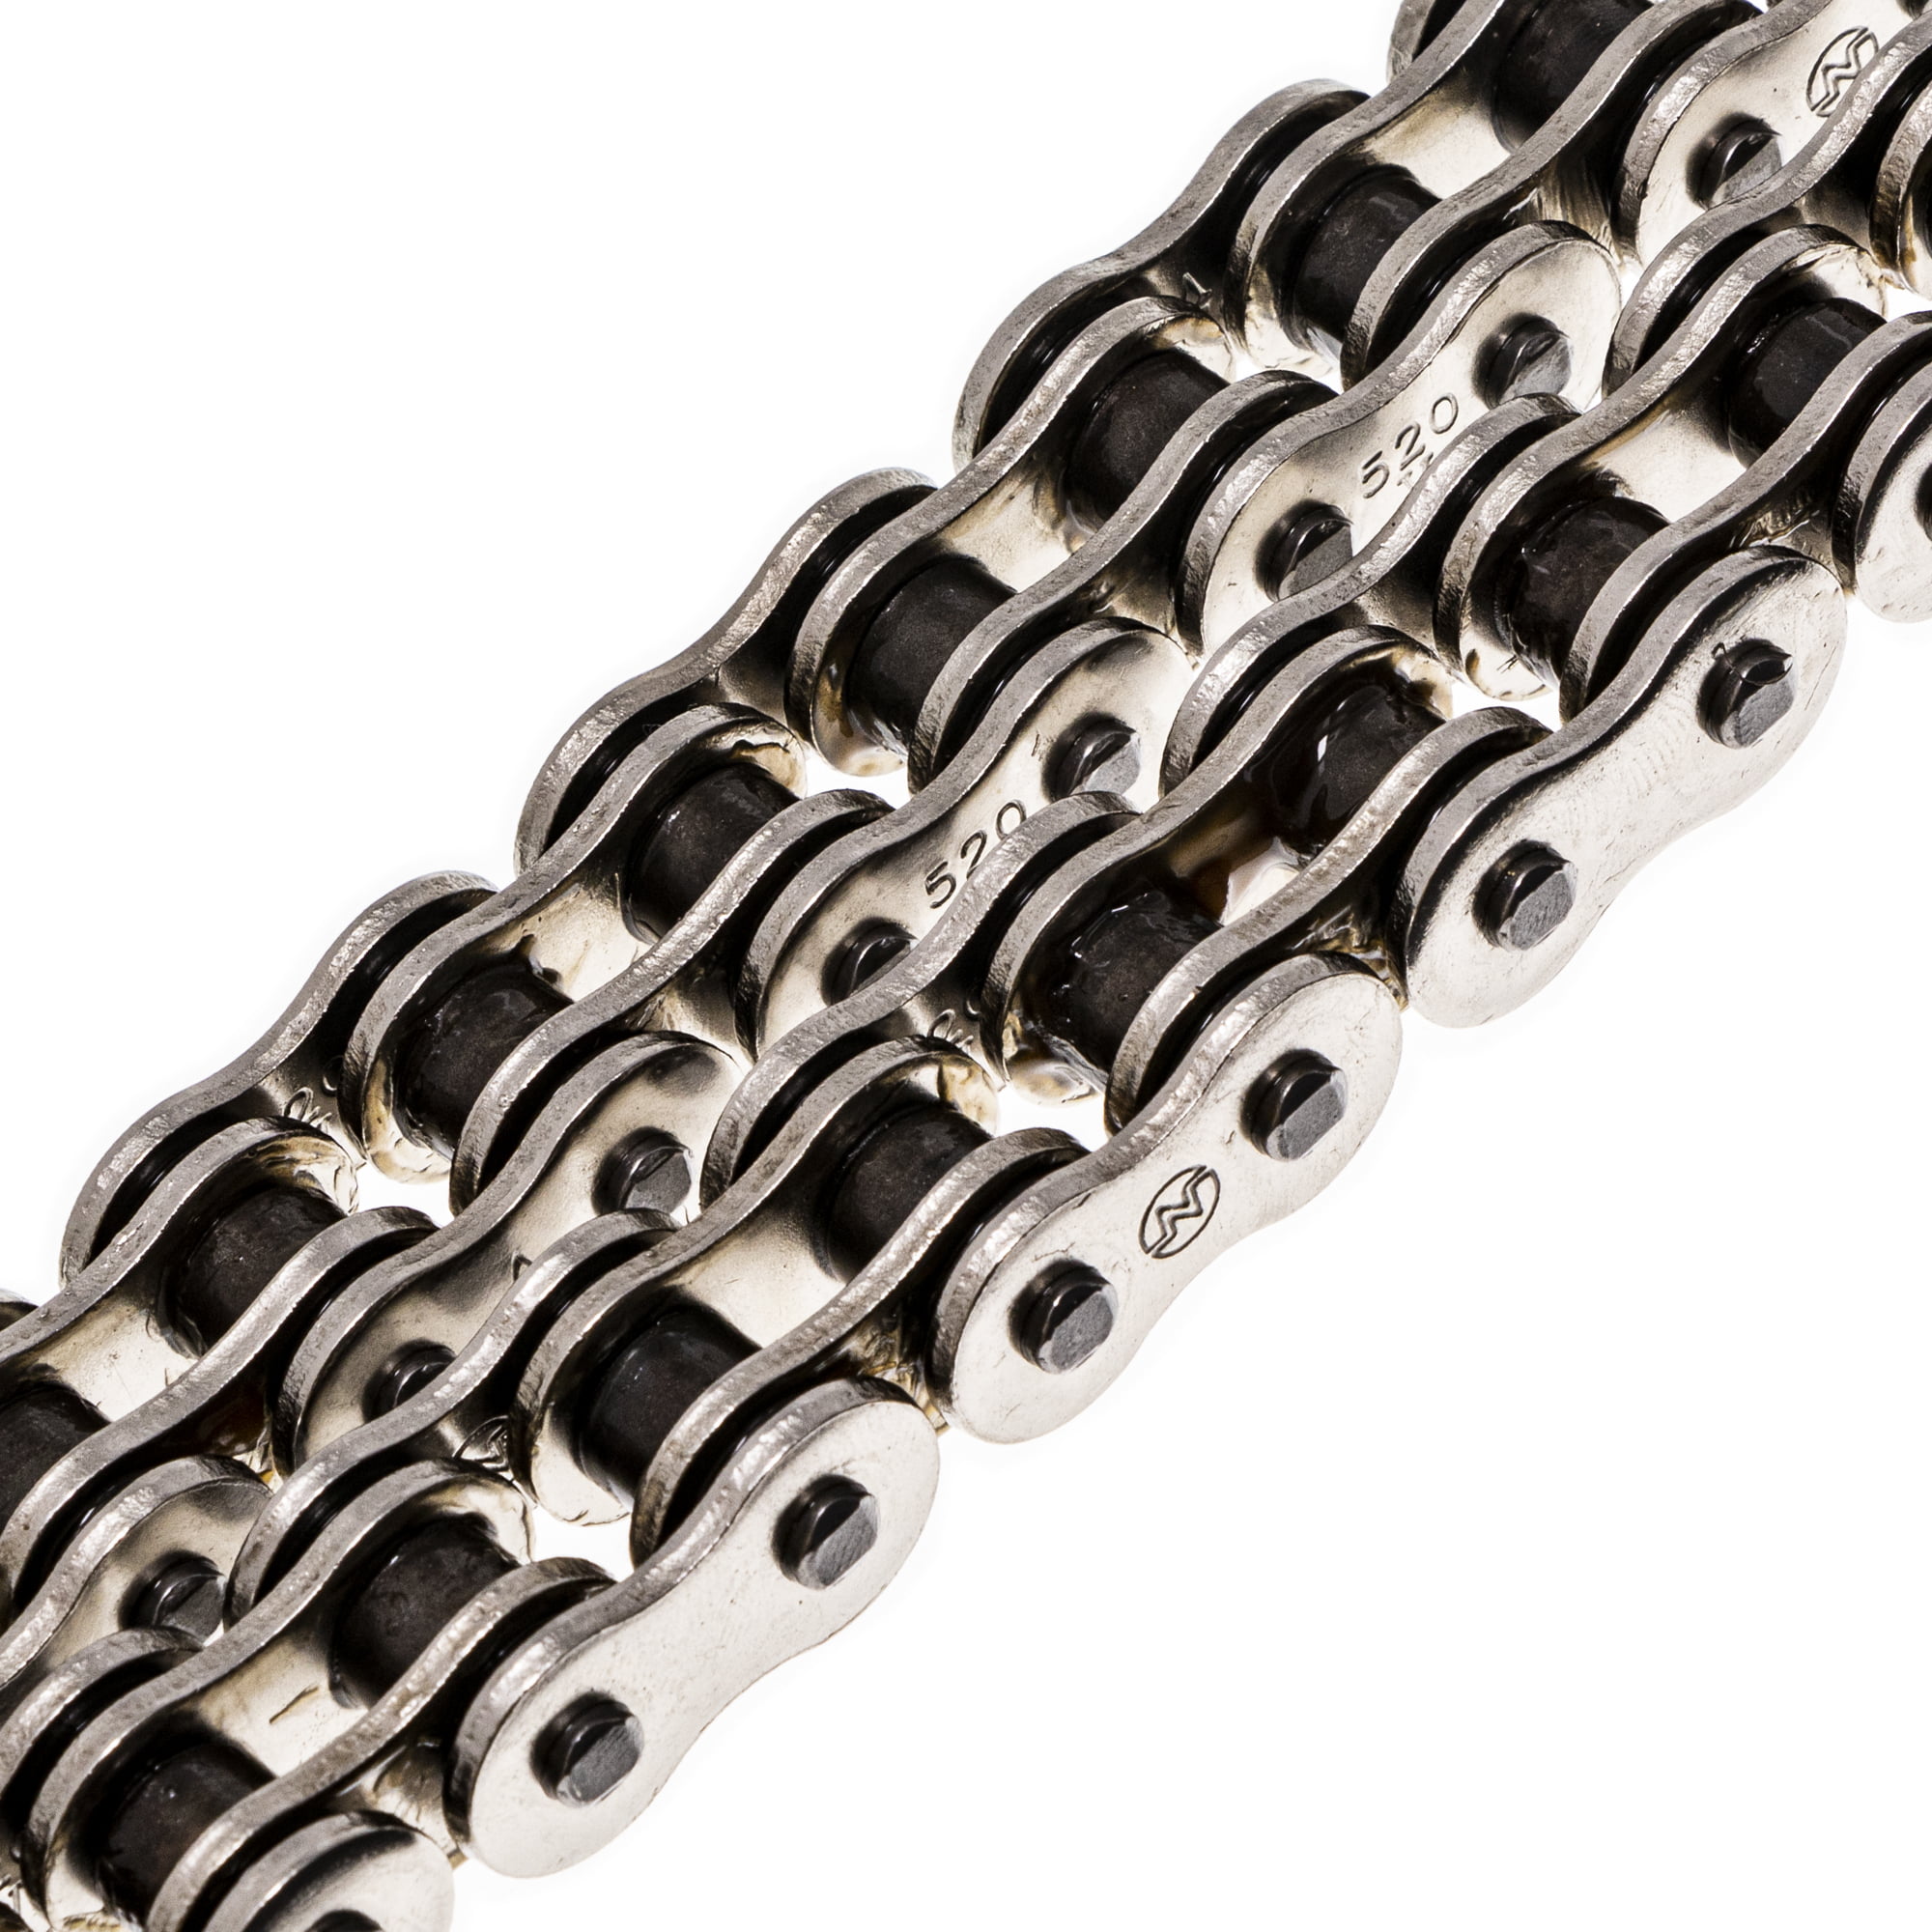 DID 520NZ-106 Chain with Connecting Link 